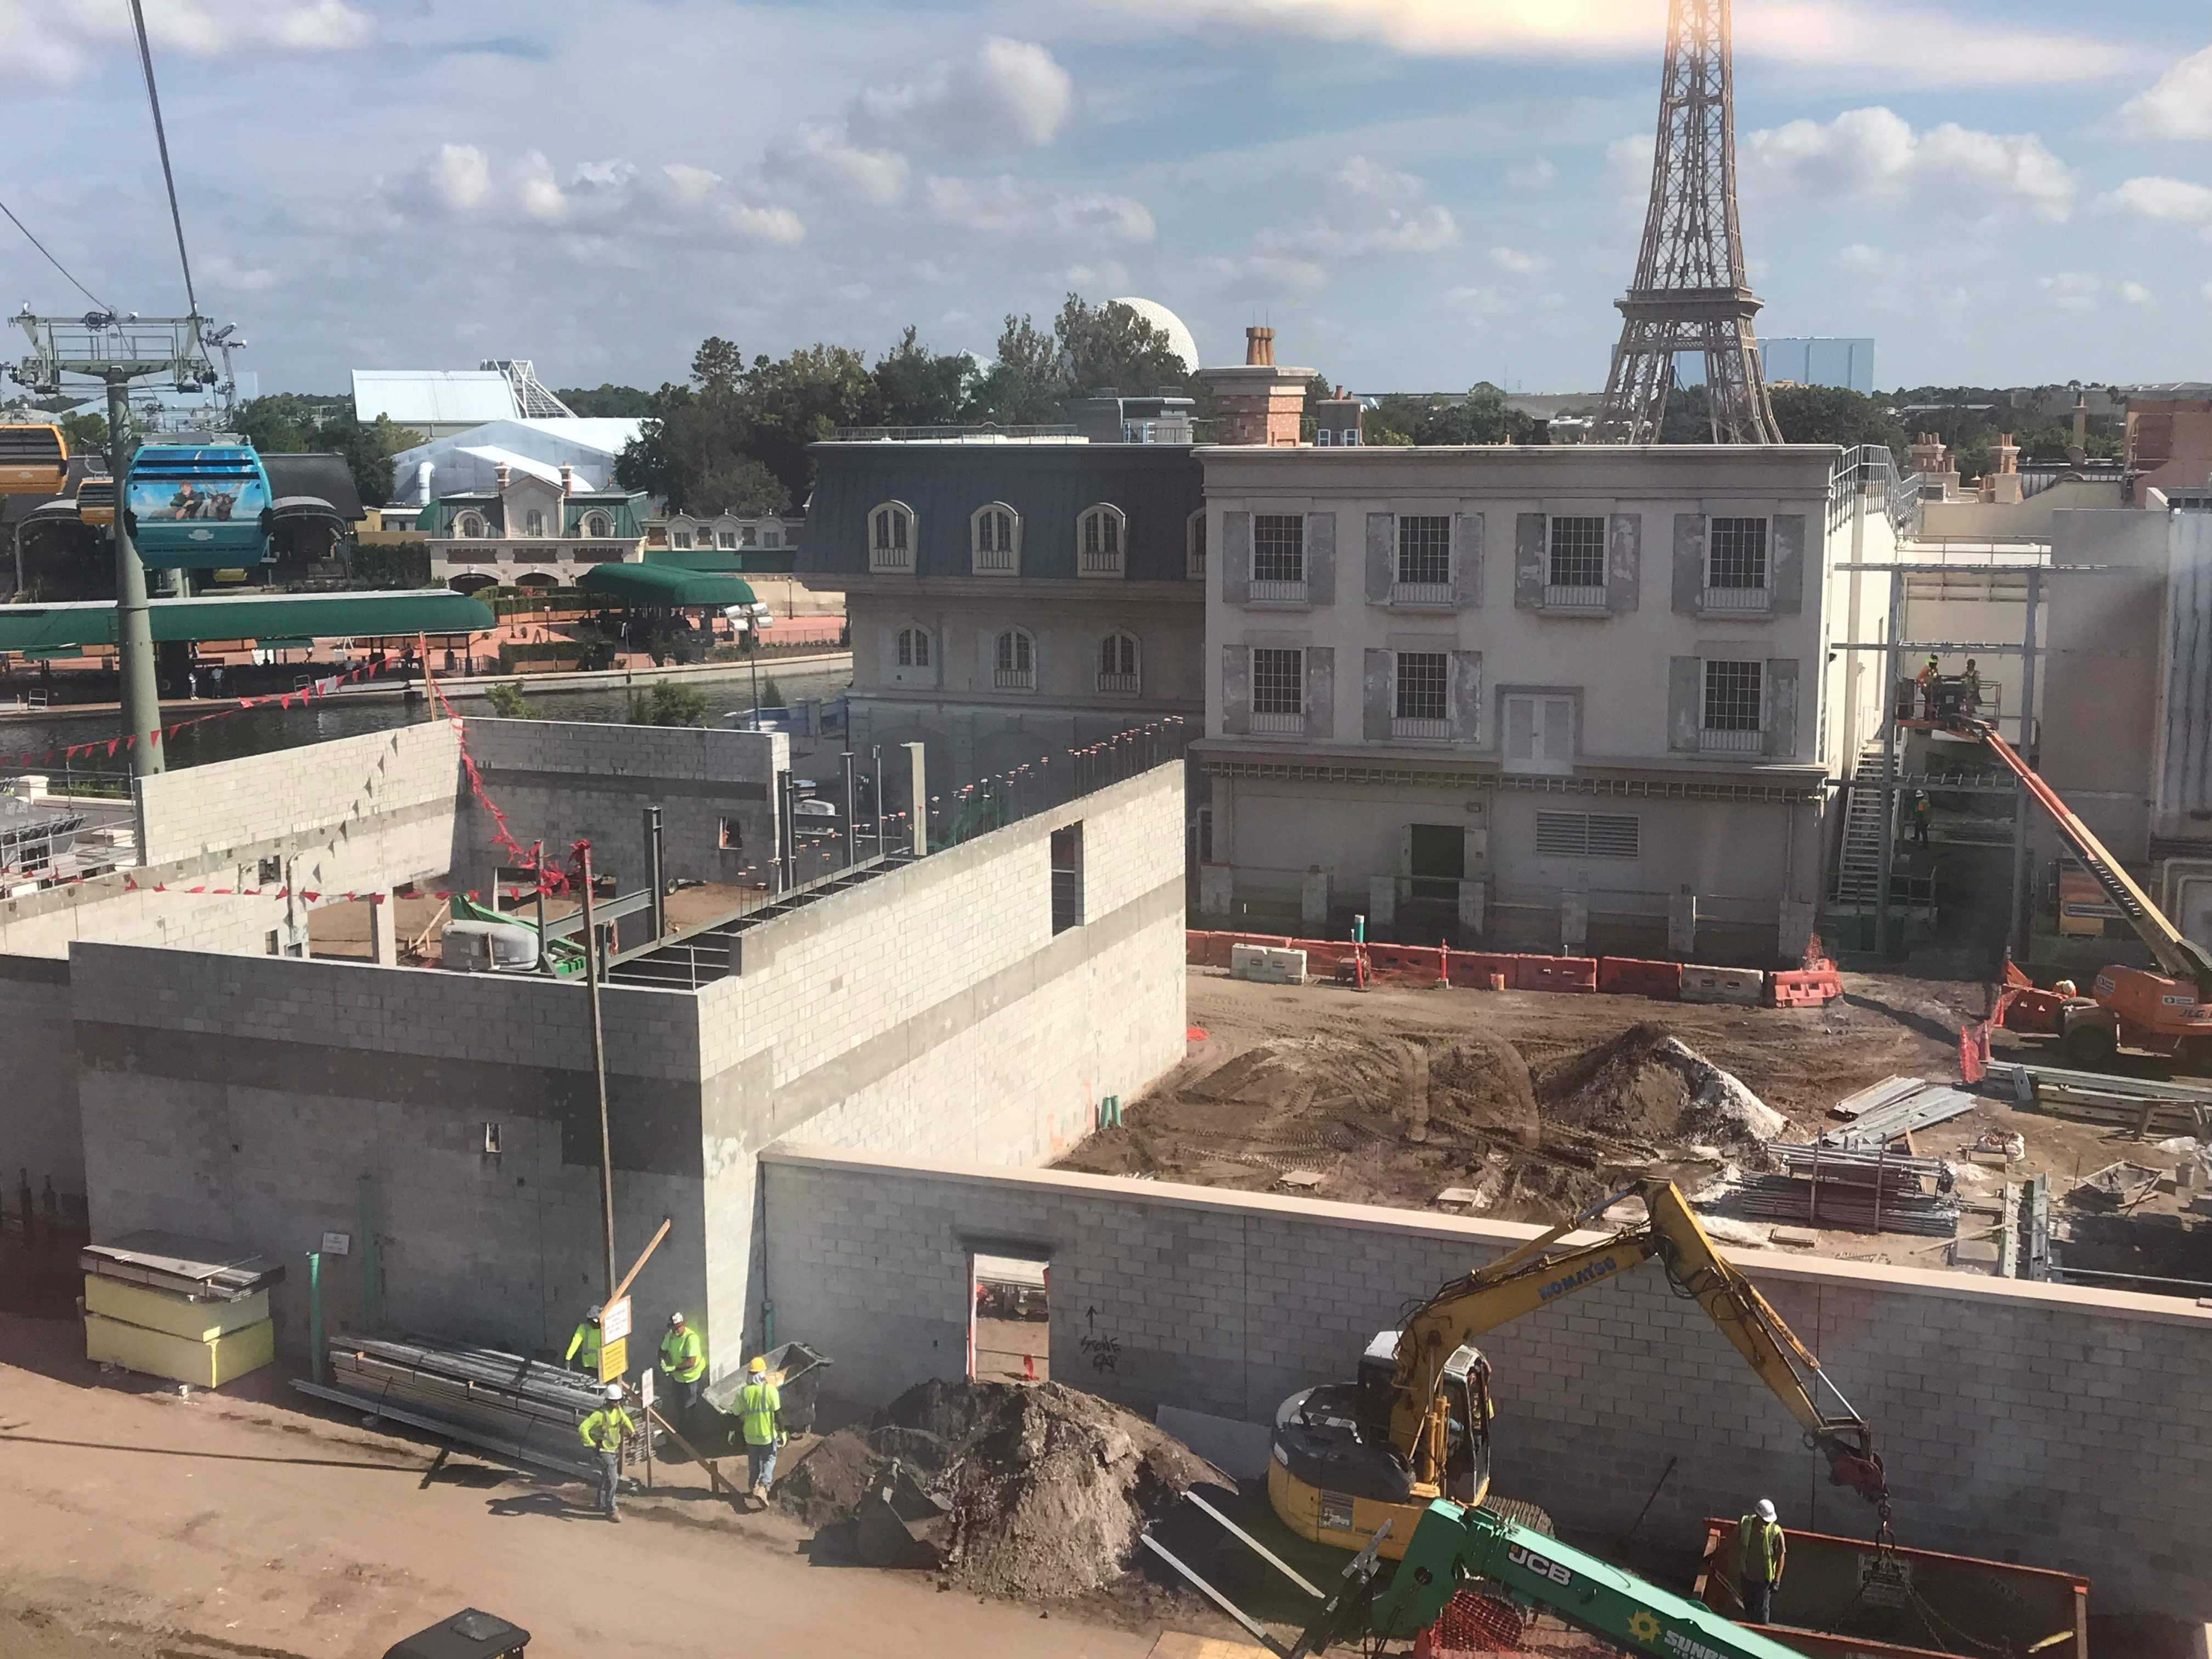 Photos: Update on Epcot’s Remy’s Ratatouille Adventure Ride